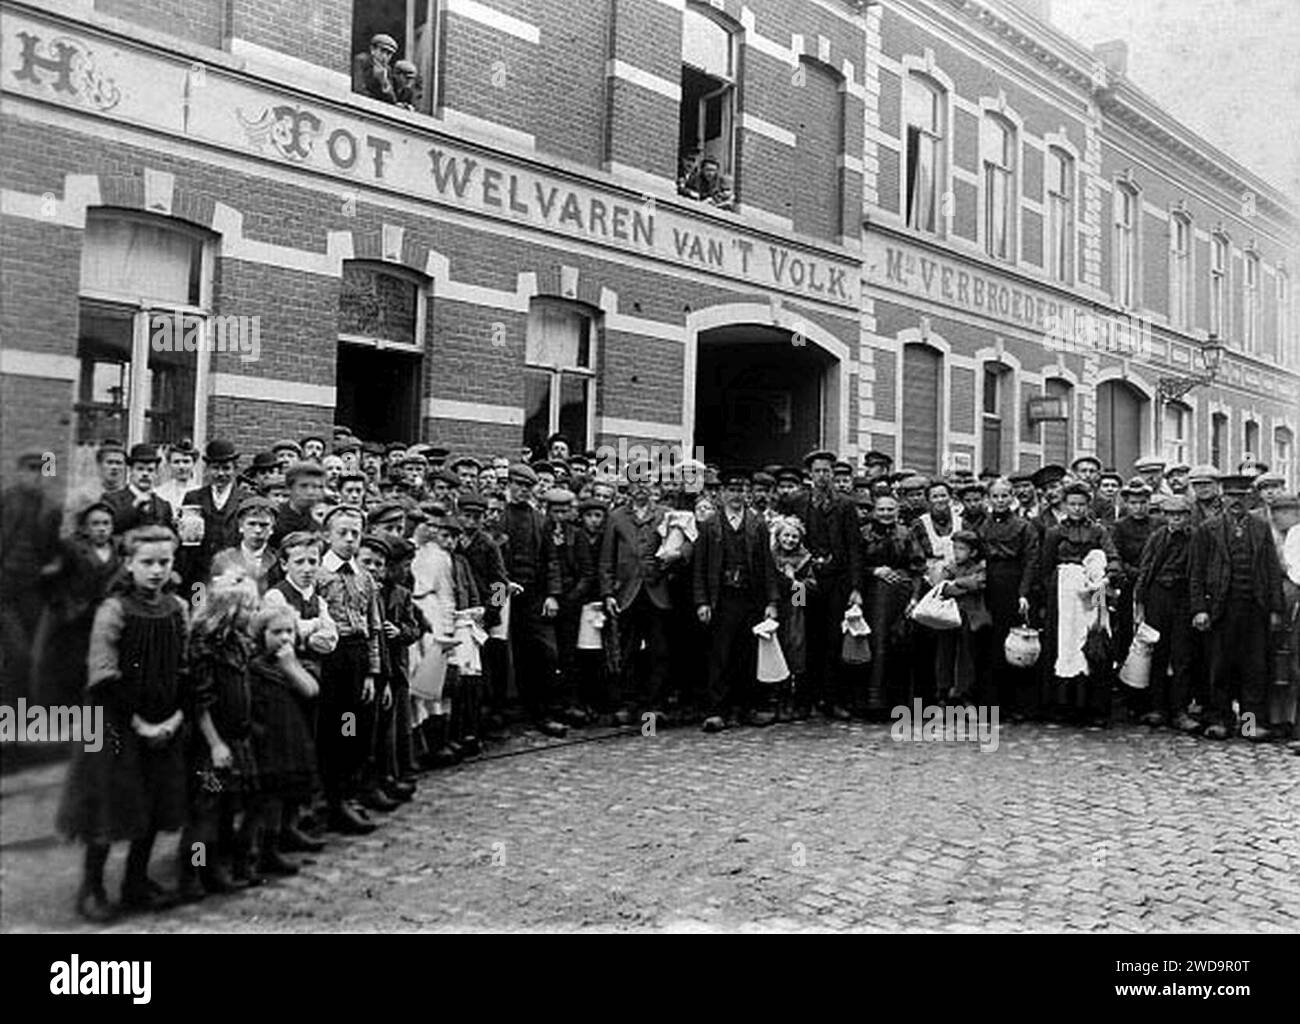 1907 strike at Beernaerts, Wetteren - workers amass in front of soup kitchen. Stock Photo